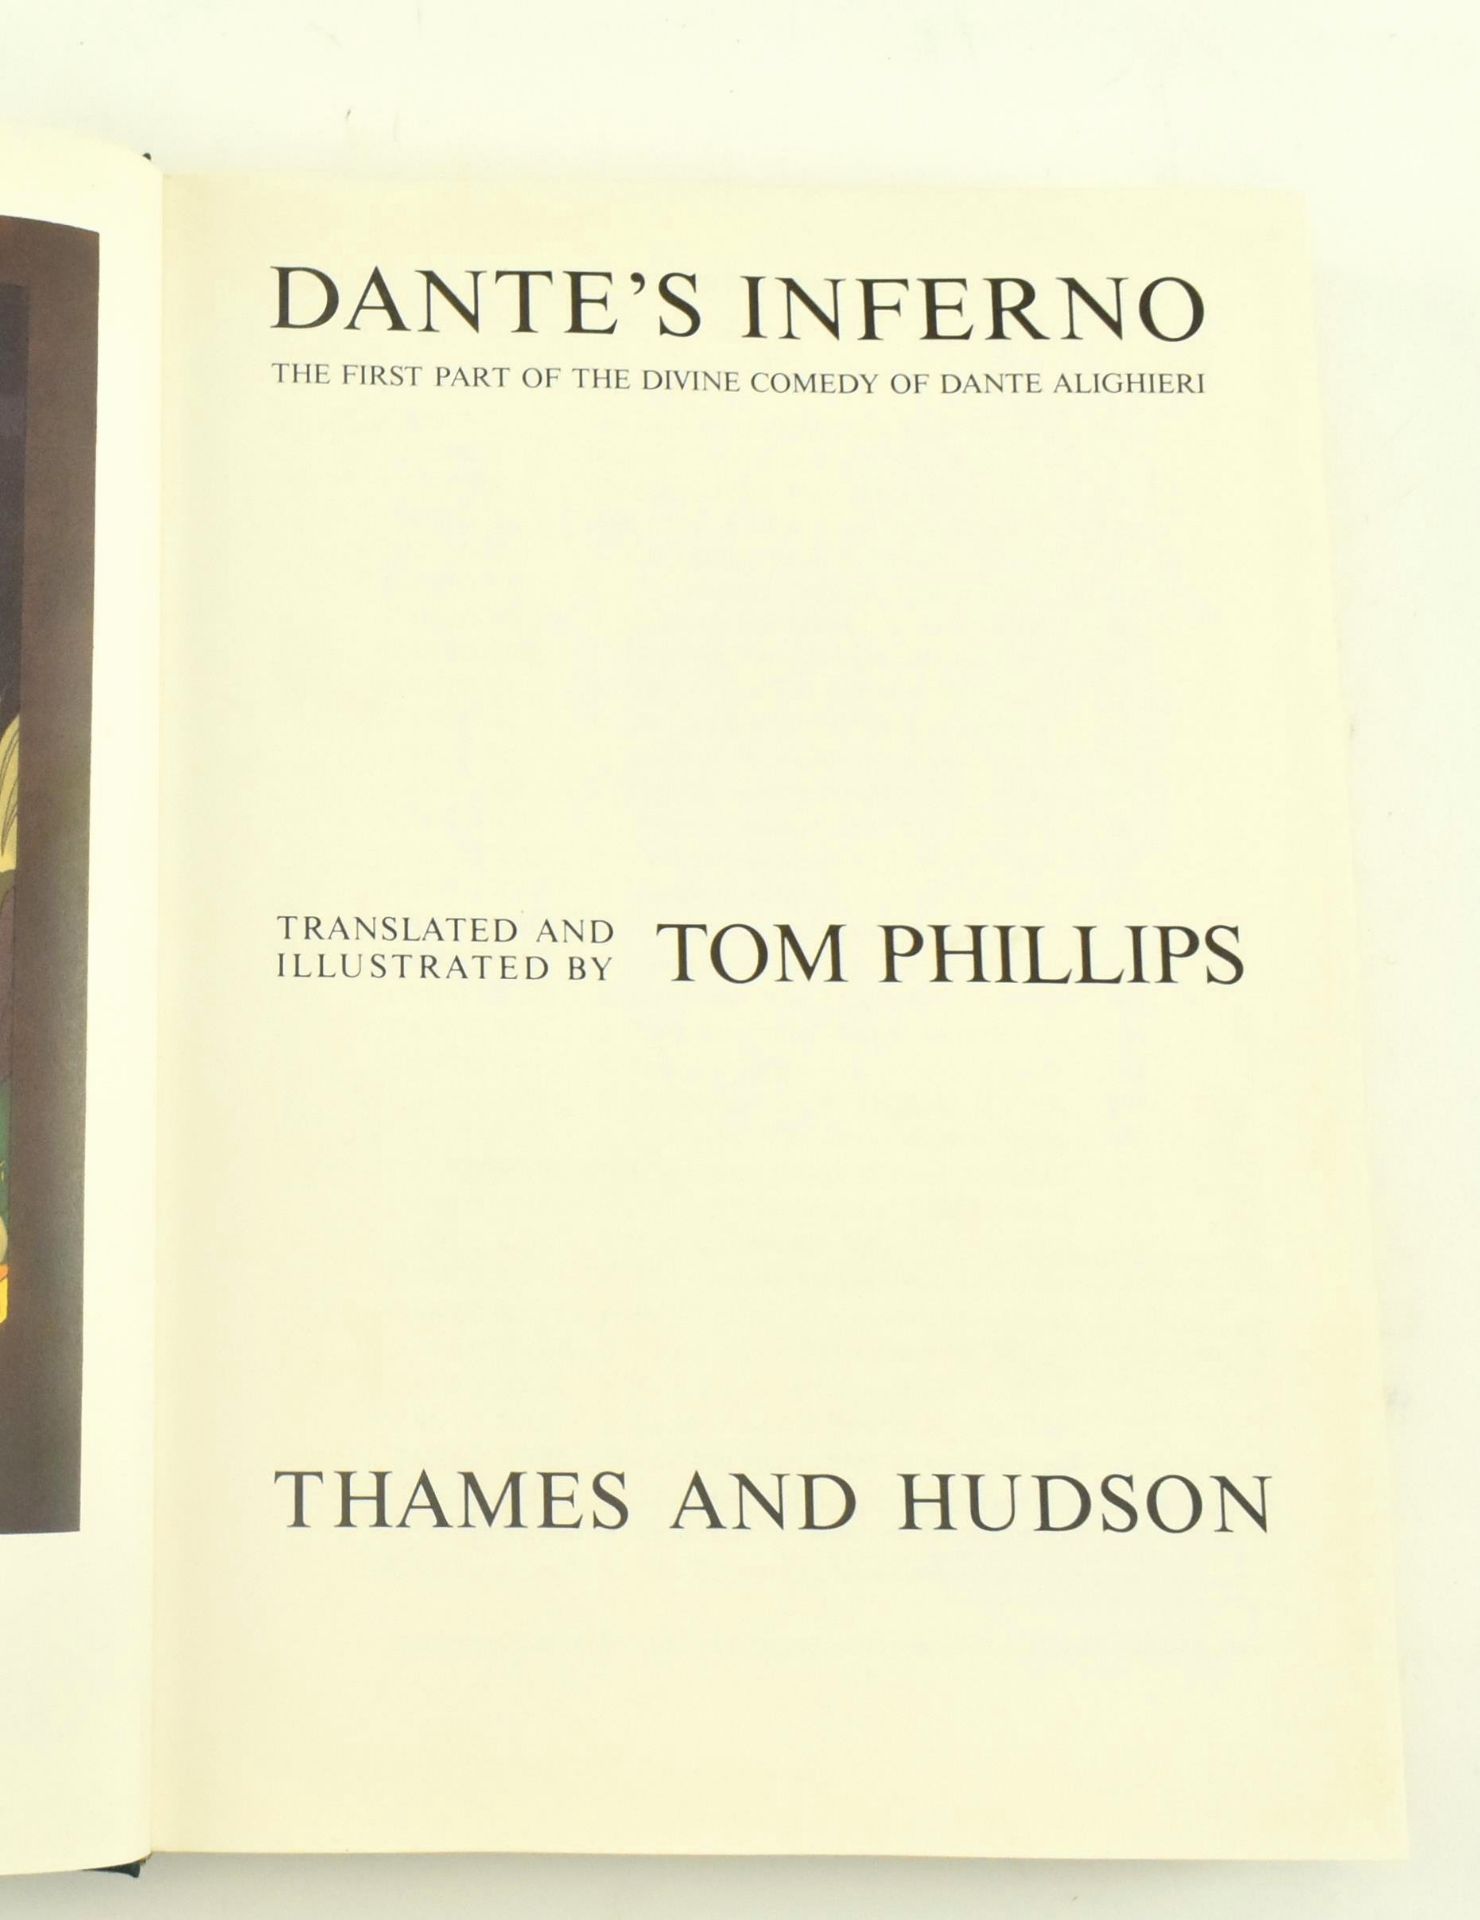 TOM PHILLIPS. TWO ILLUSTRATED WORKS, INCL. ONE SIGNED - Image 11 of 11